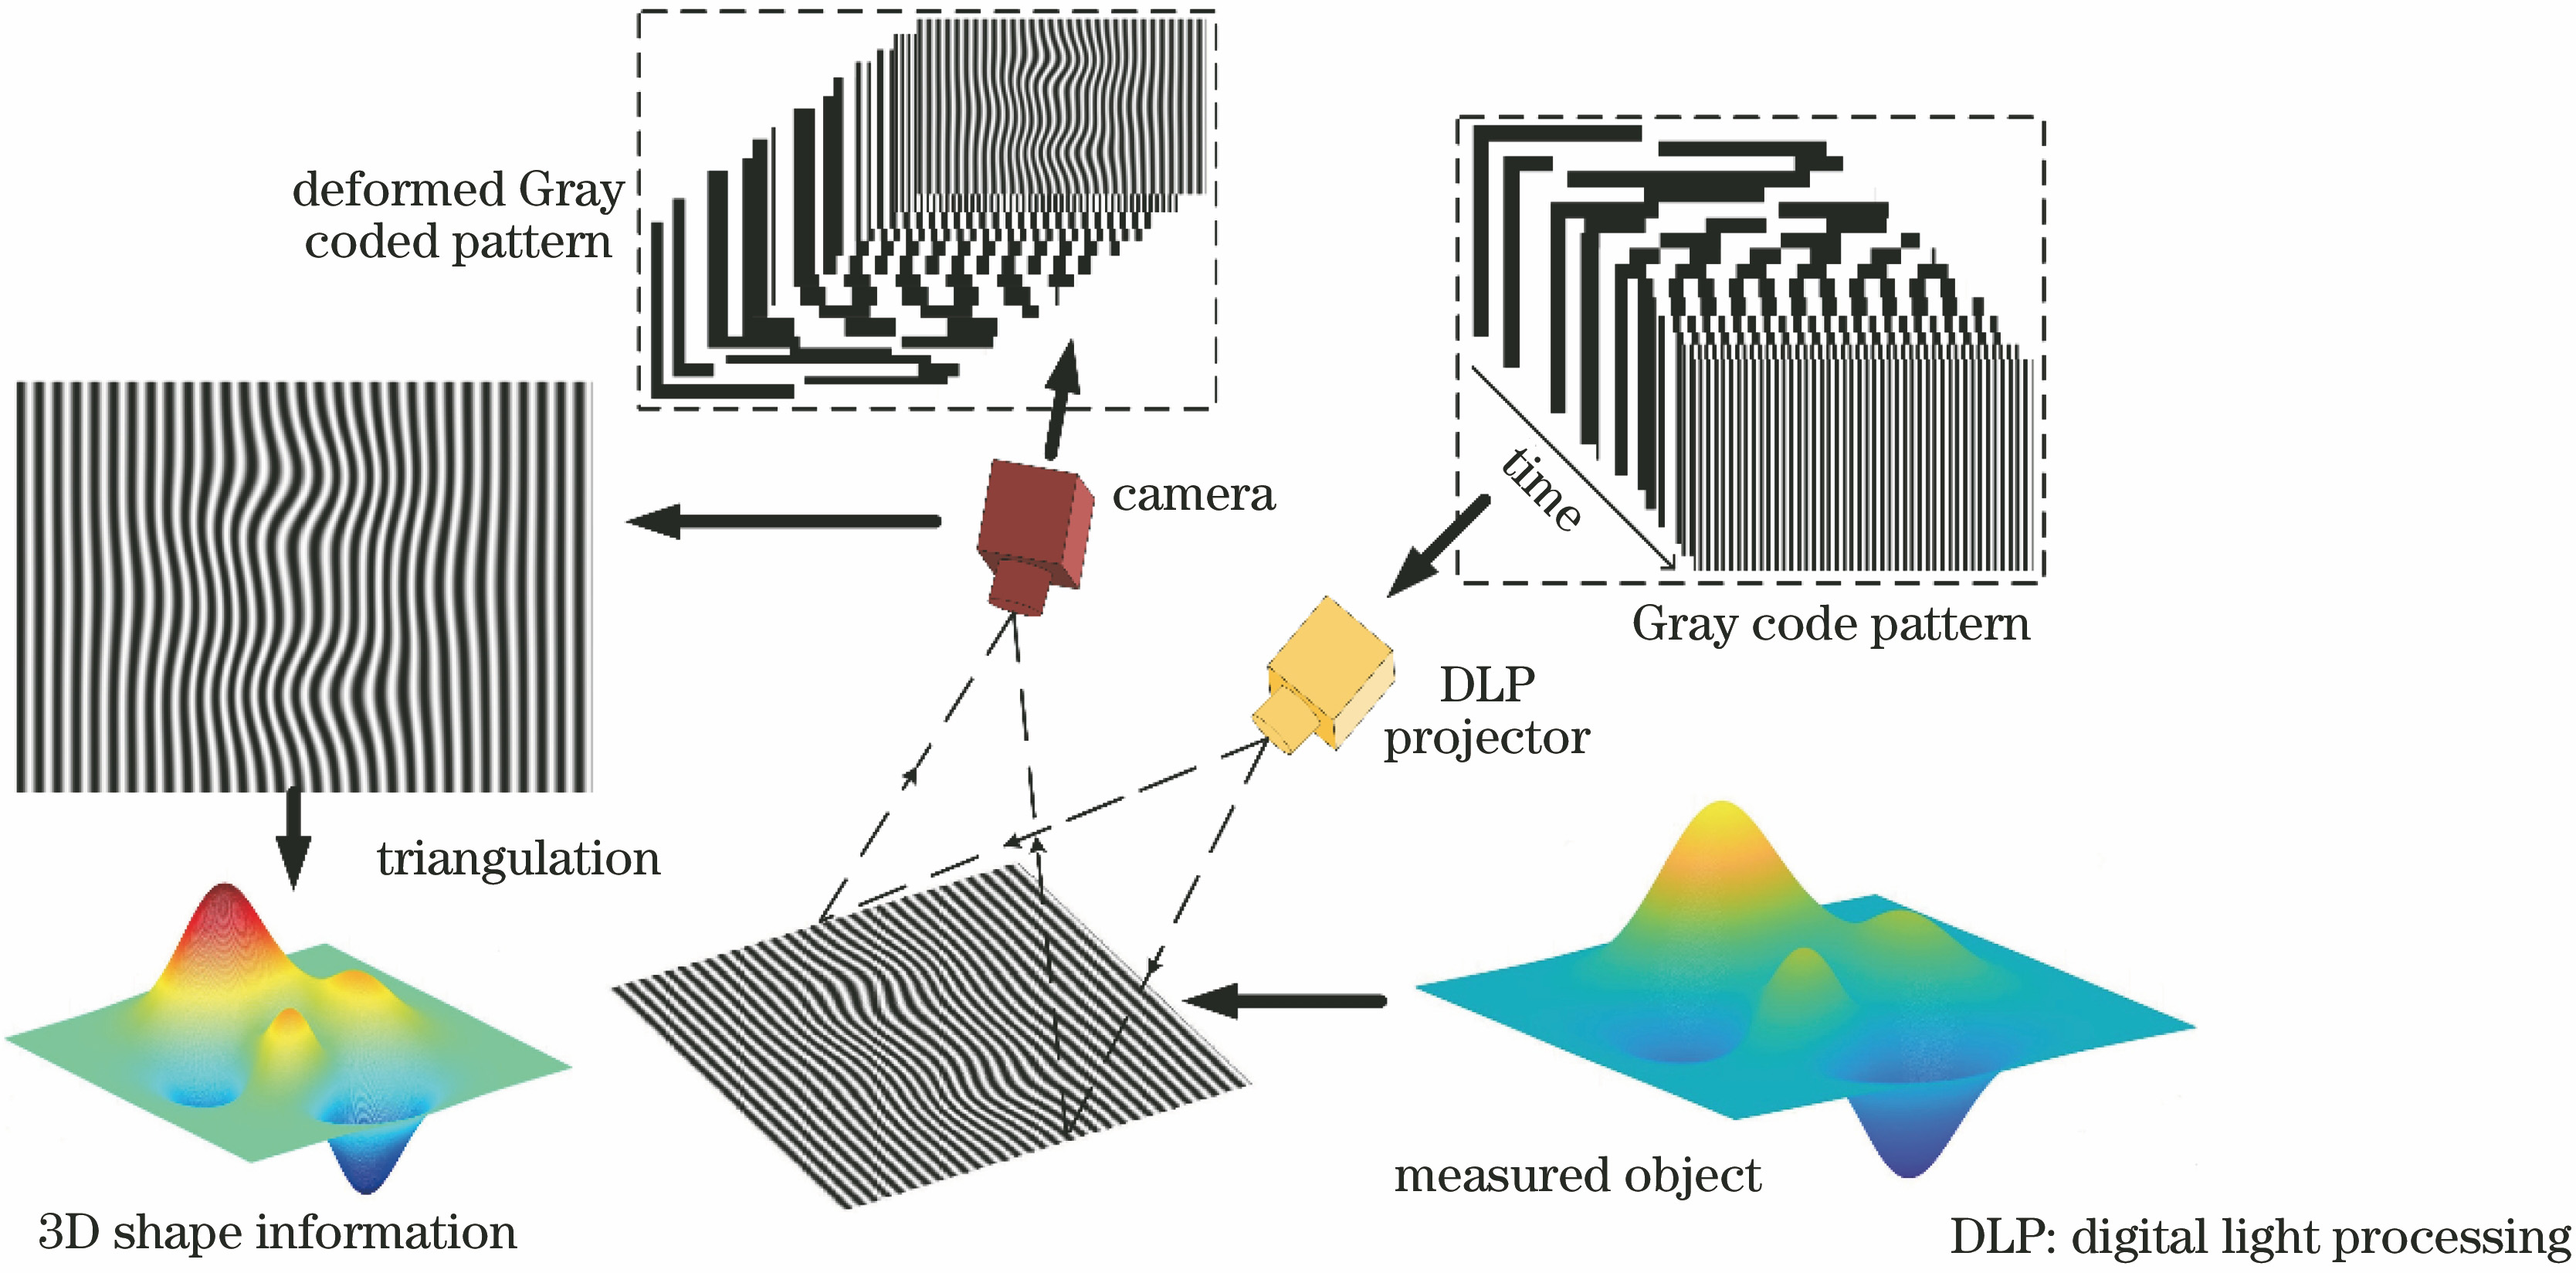 Schematic diagram of 3D reconstruction of Gray code structured light